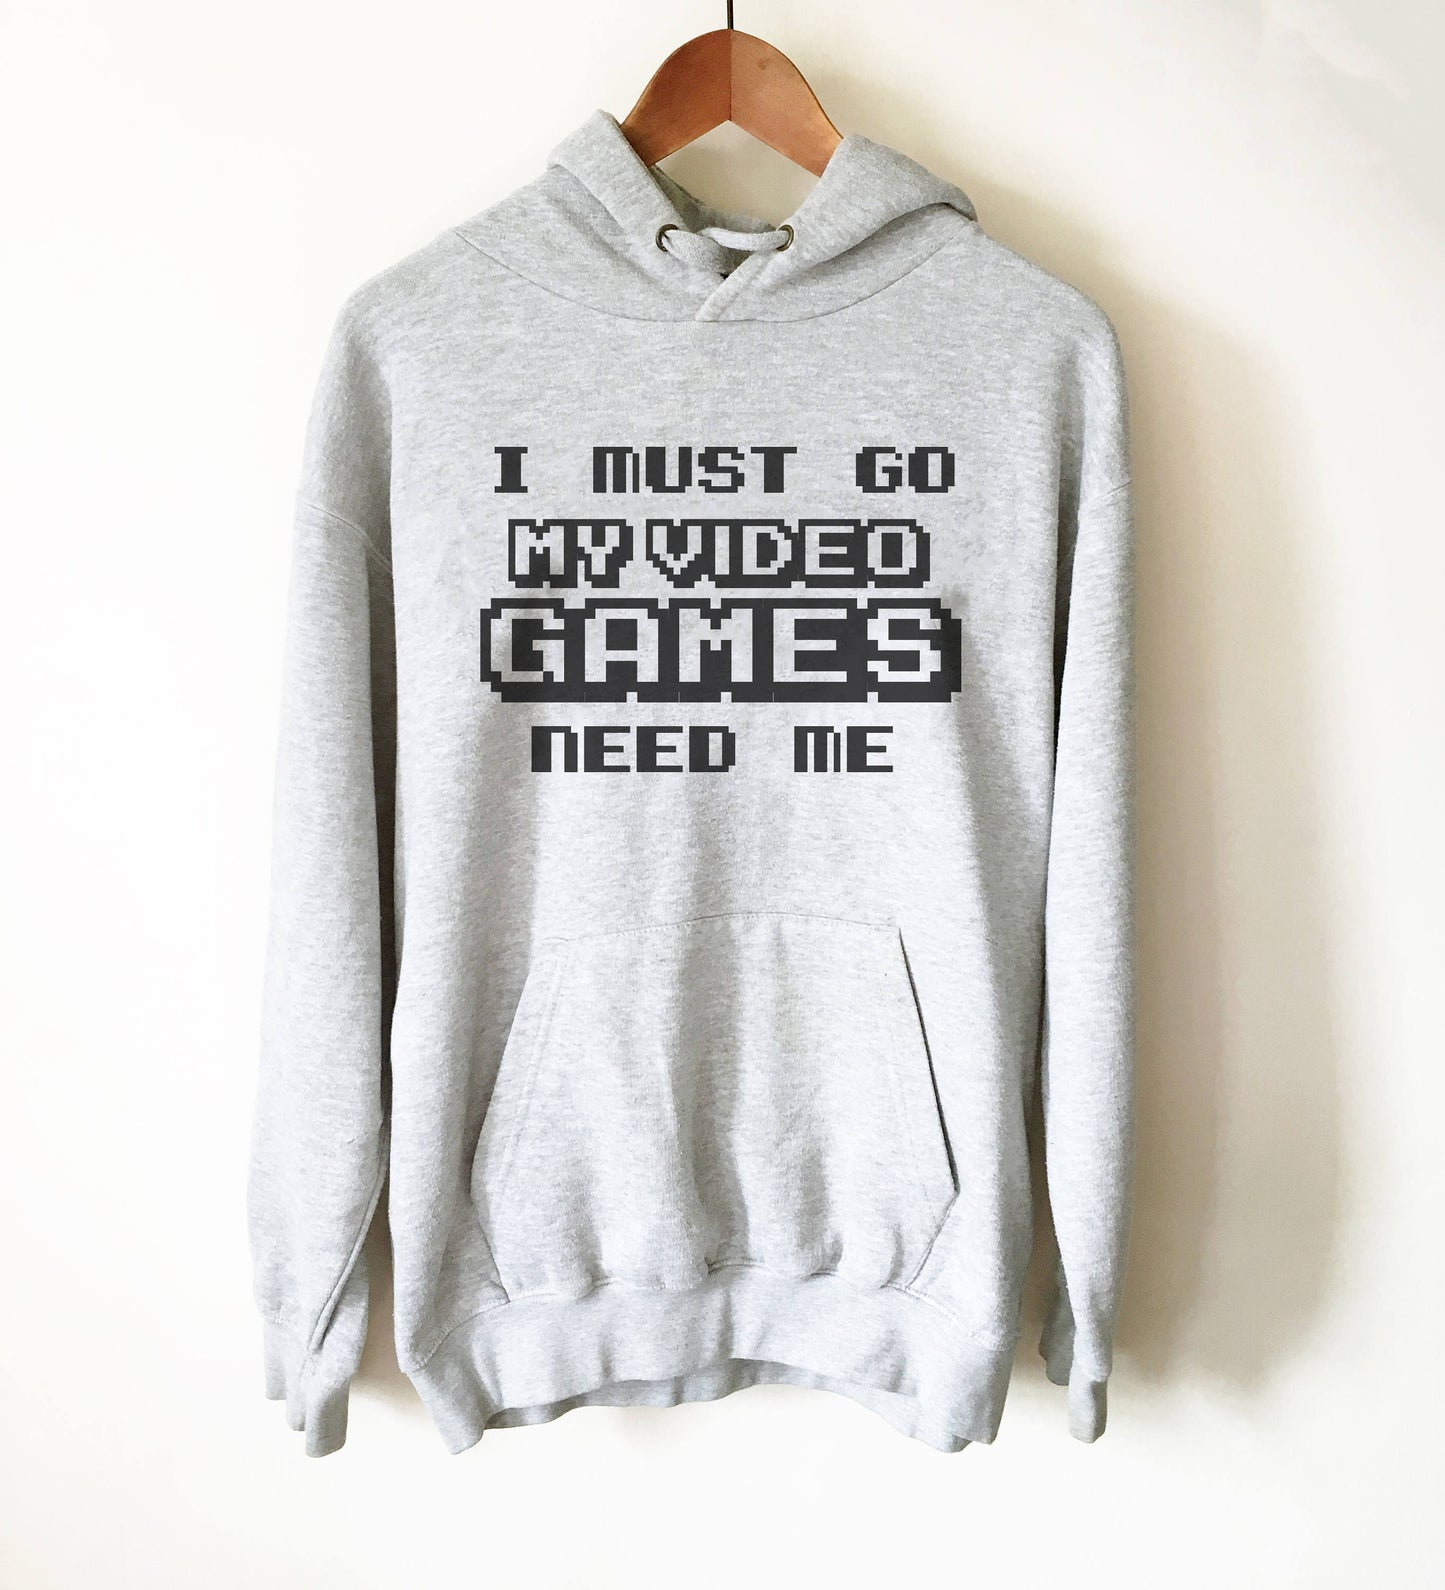 I Must Go My Video Games Need Me Hoodie - Videogame tshirt, Videogame gift, Video game shirt, Gaming gift, Gaming shirt